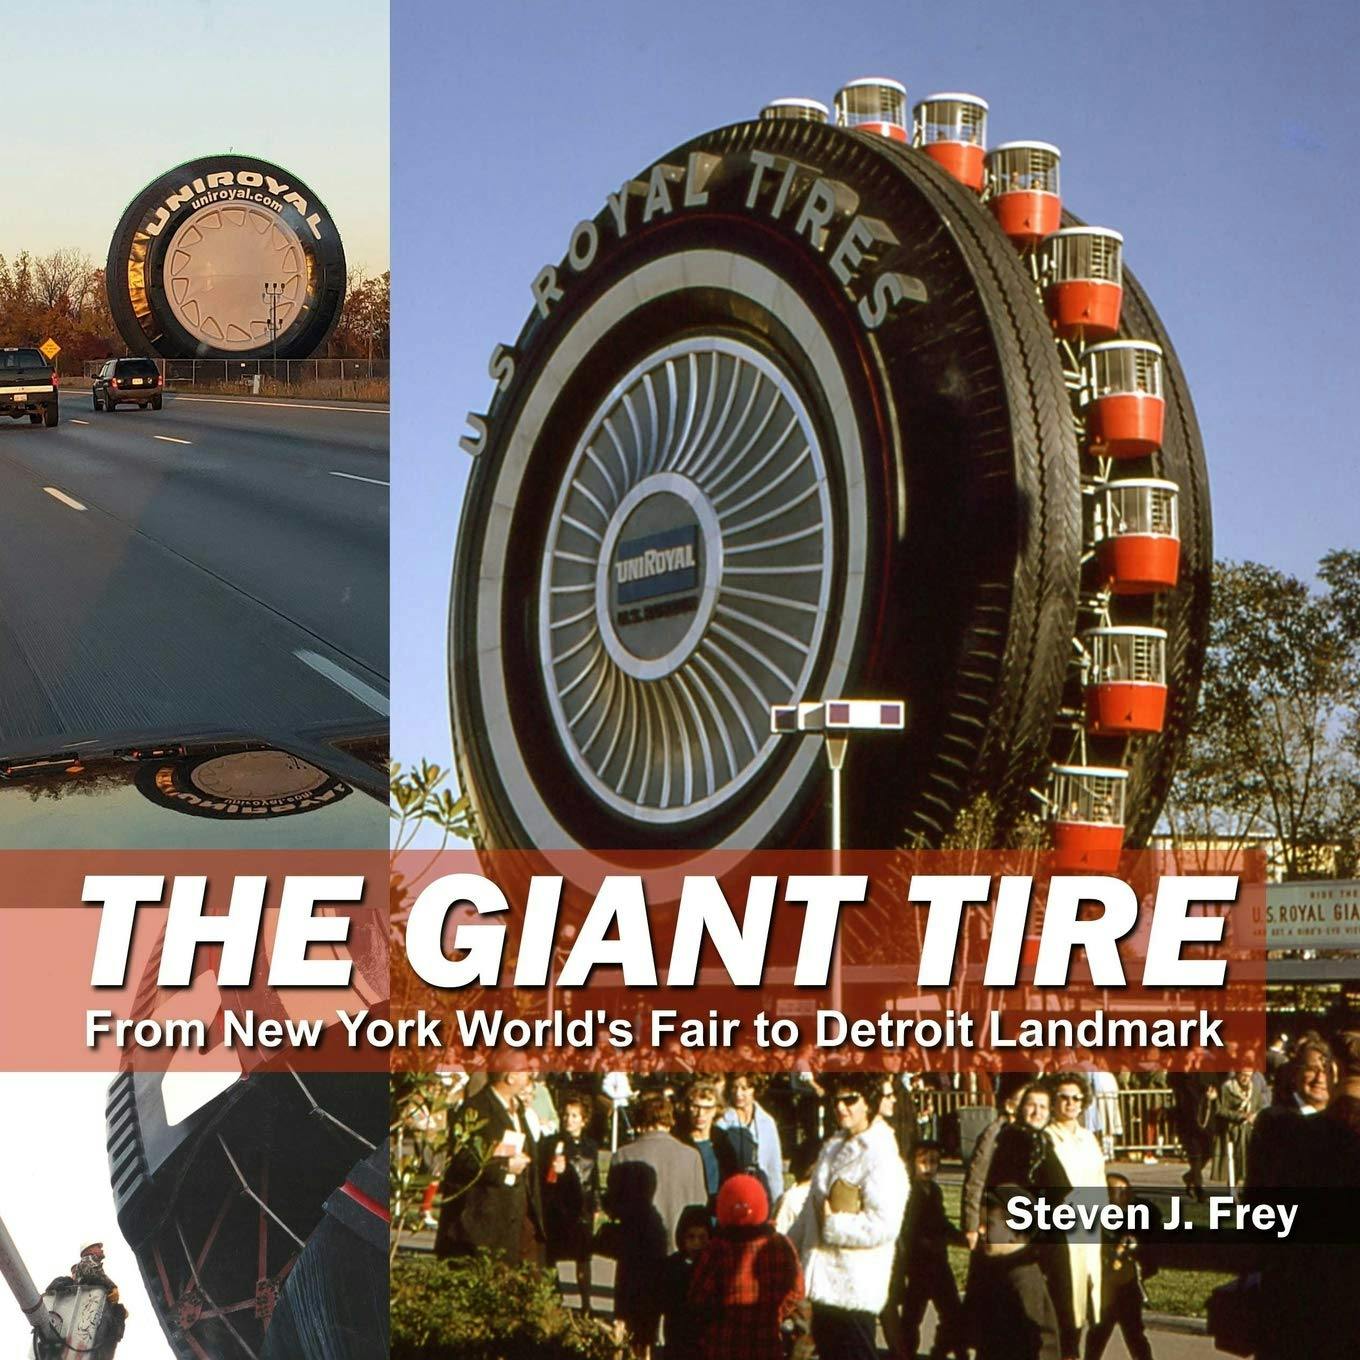 Giant Uniroyal Tire - book cover